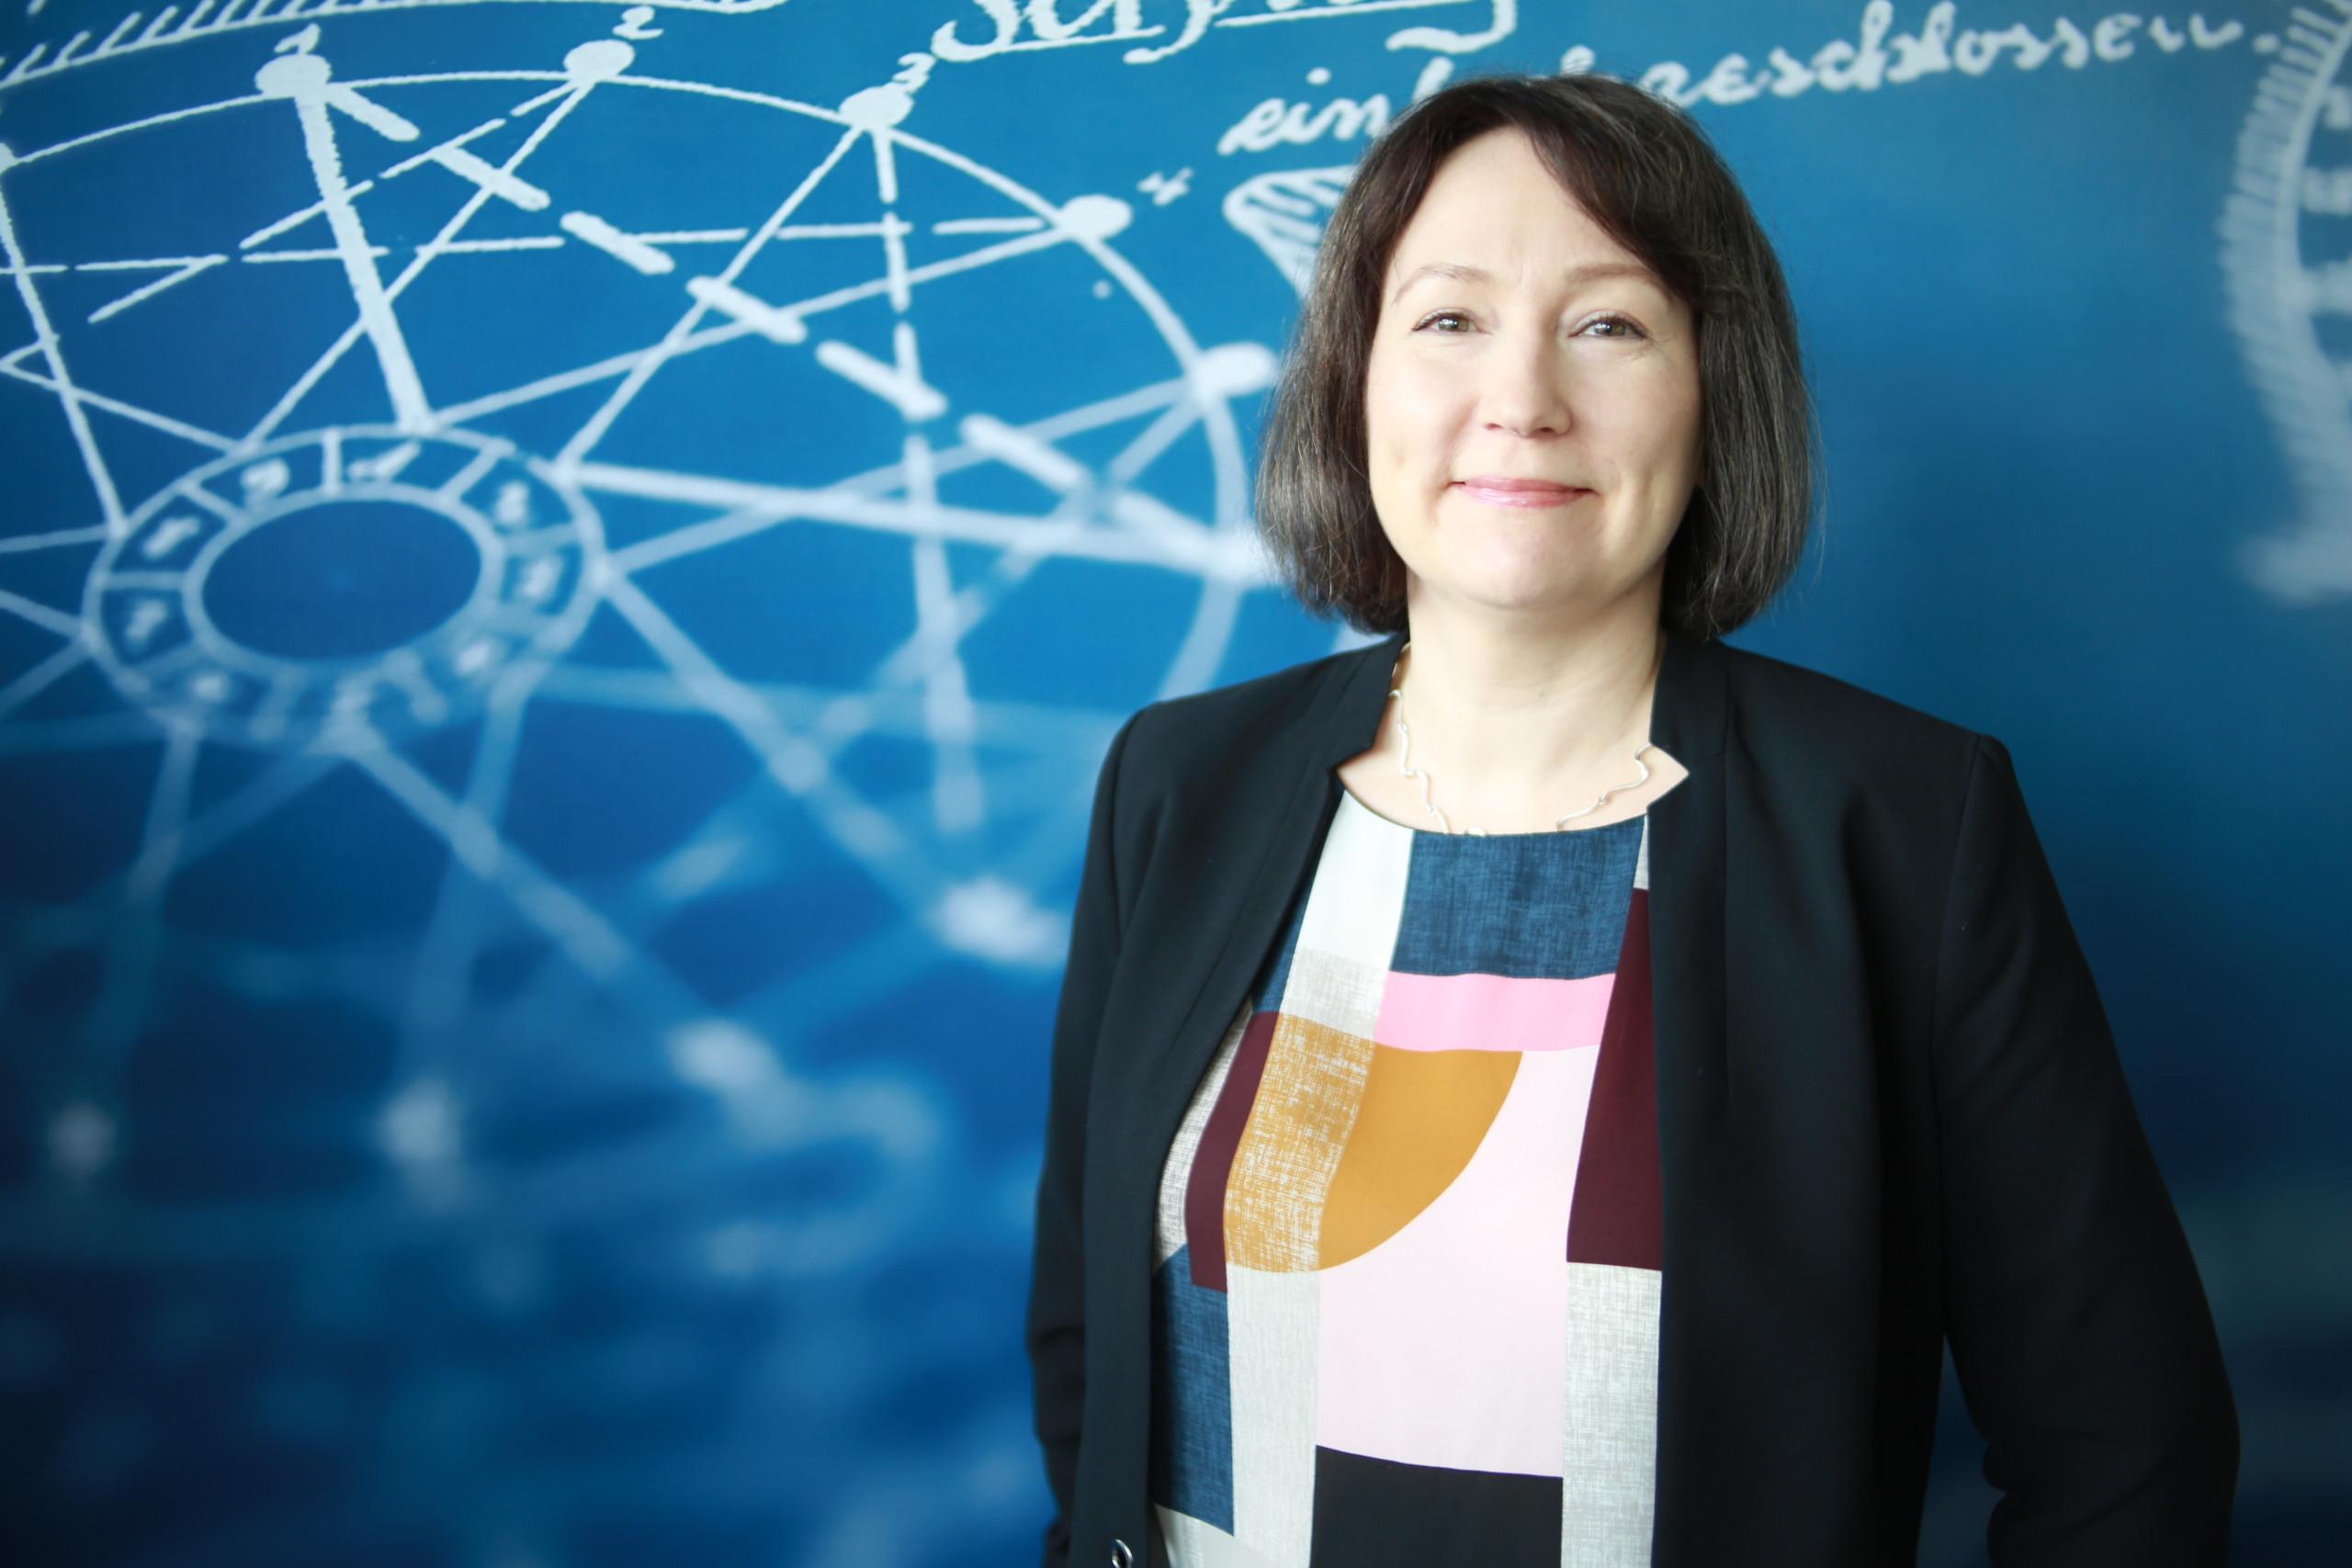 We are happy to welcome Nina Virolainen to join our Chemistry and Biotechnology team